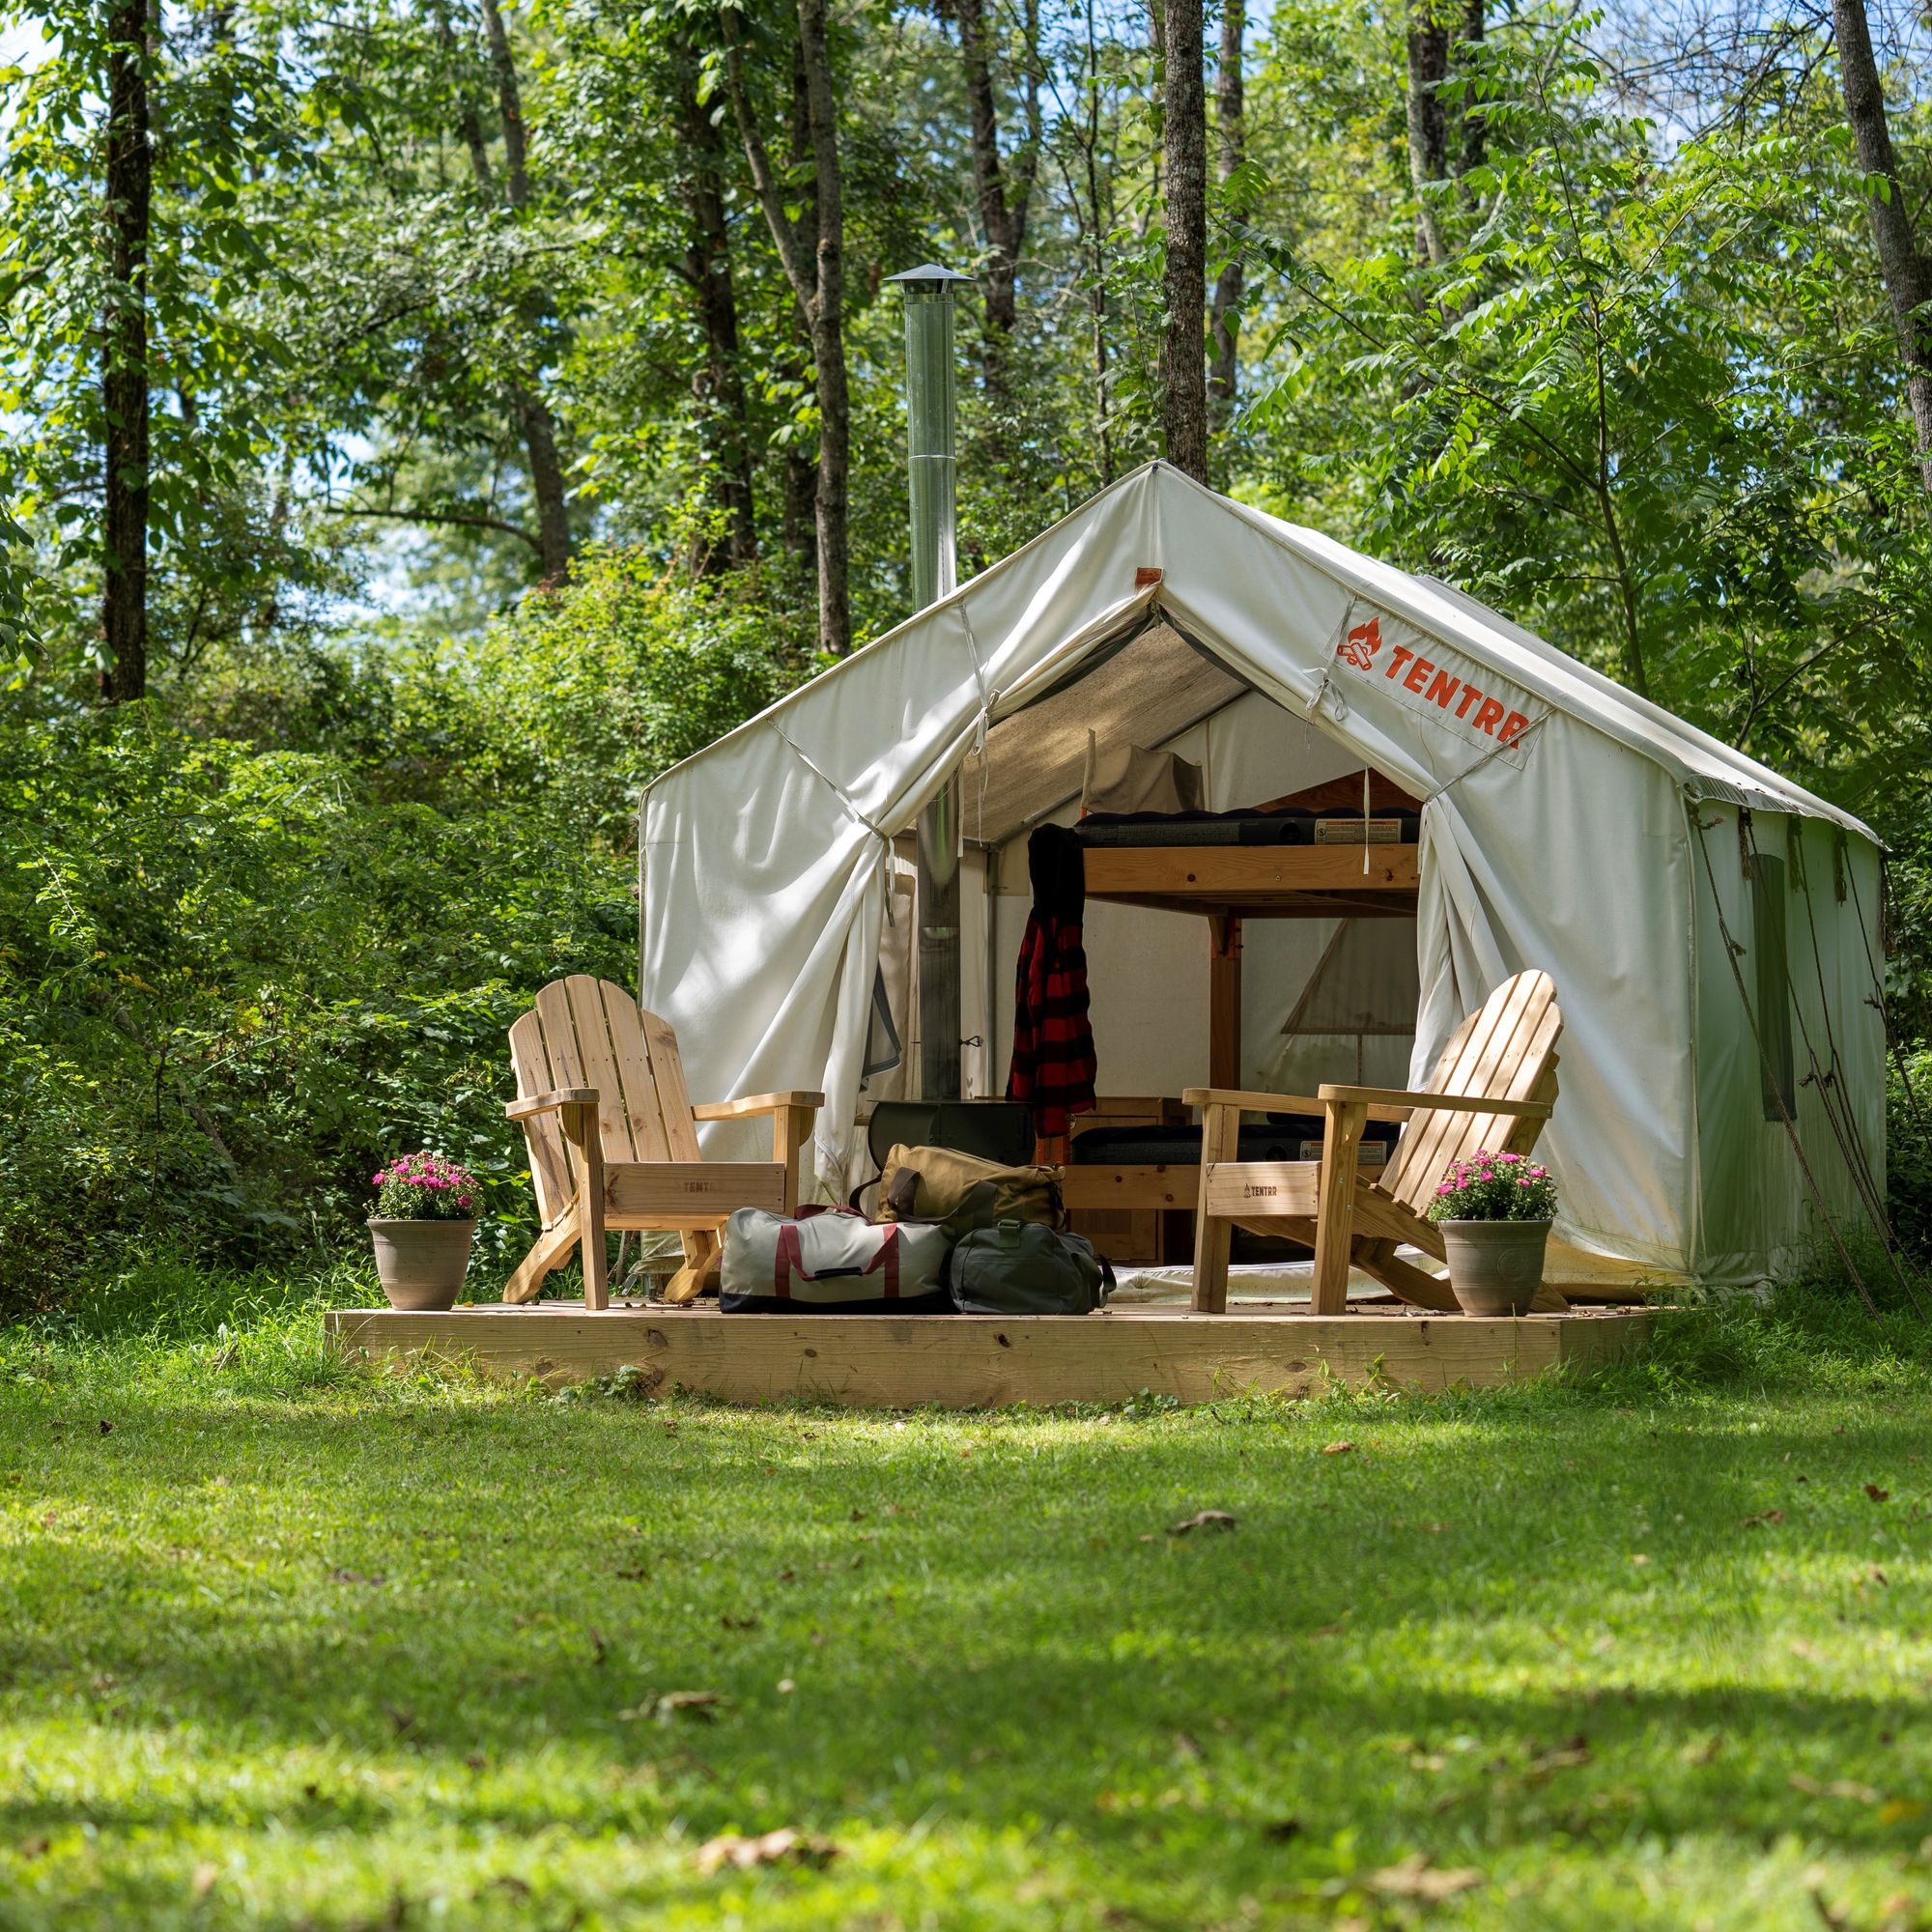 Tentrr Presents A Better Way to Camp and Glamp That Helps Both Campers and Property Owners